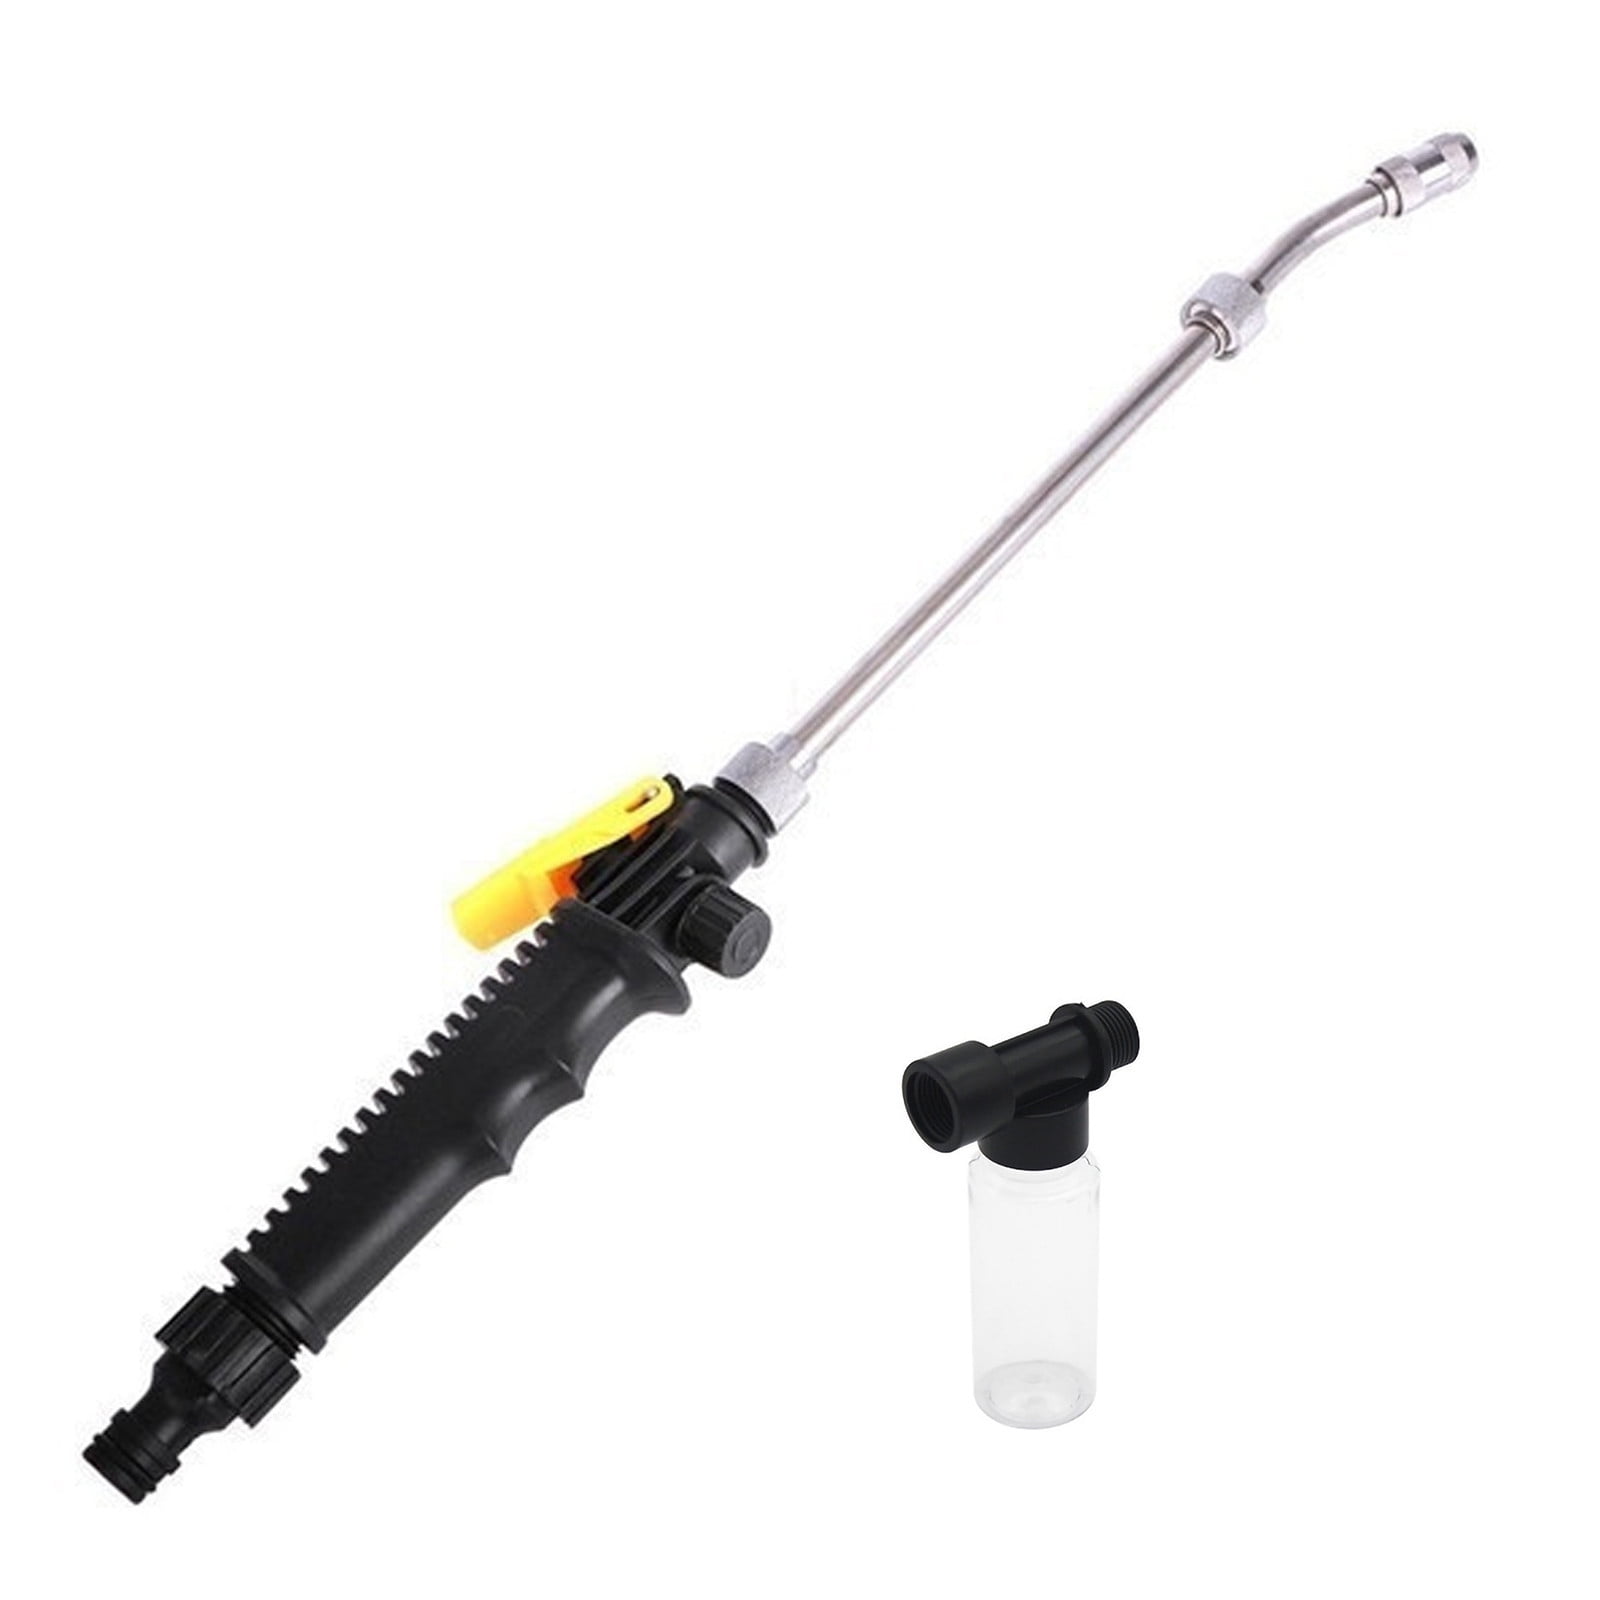 35CM 2-in-1 High Pressure Power Washer Home Garden Cleaning Tool Sprayer Replace 